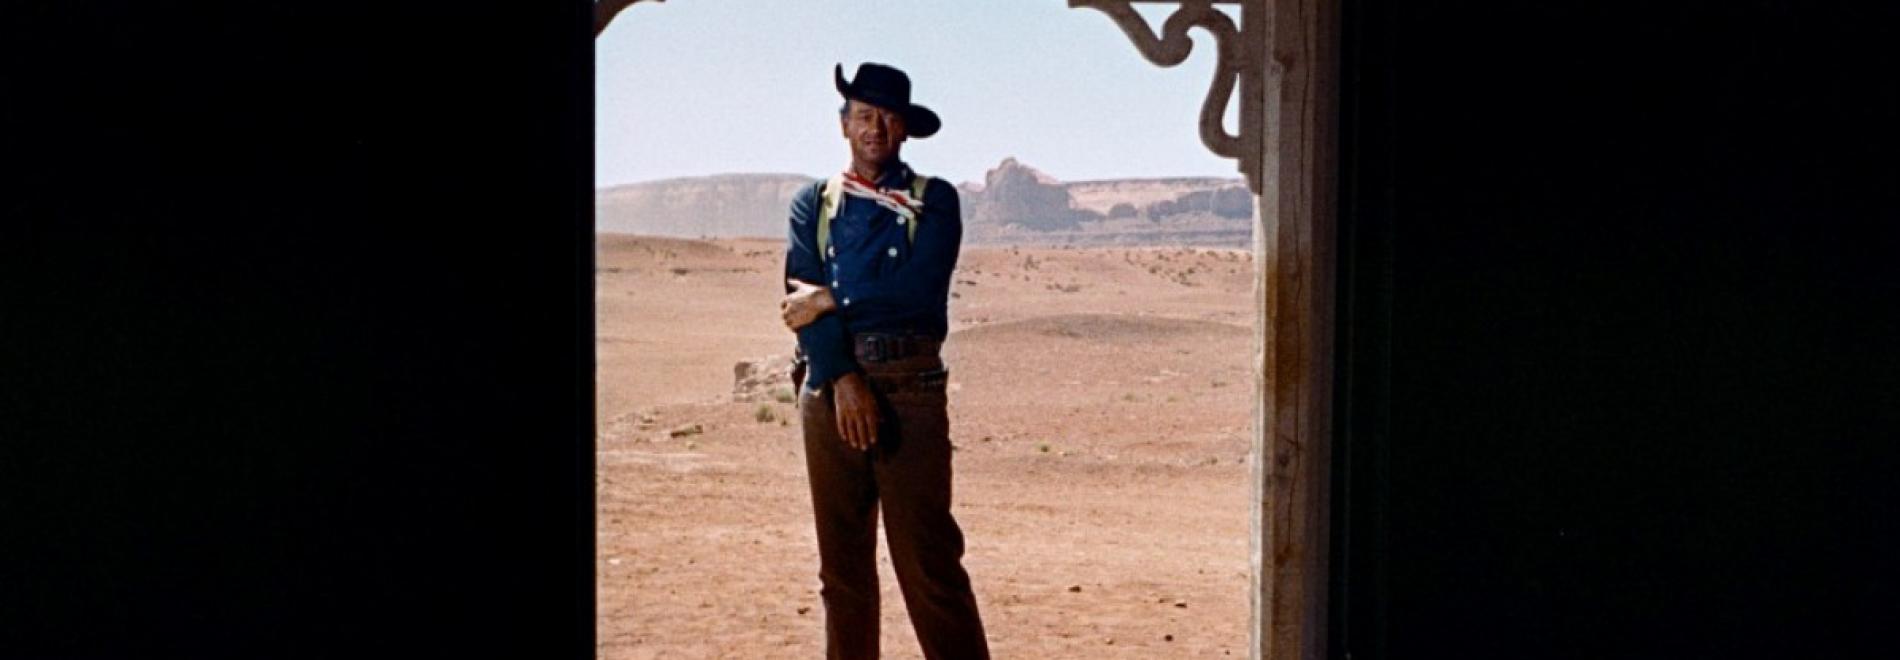 The Searchers (John Ford, 1956)